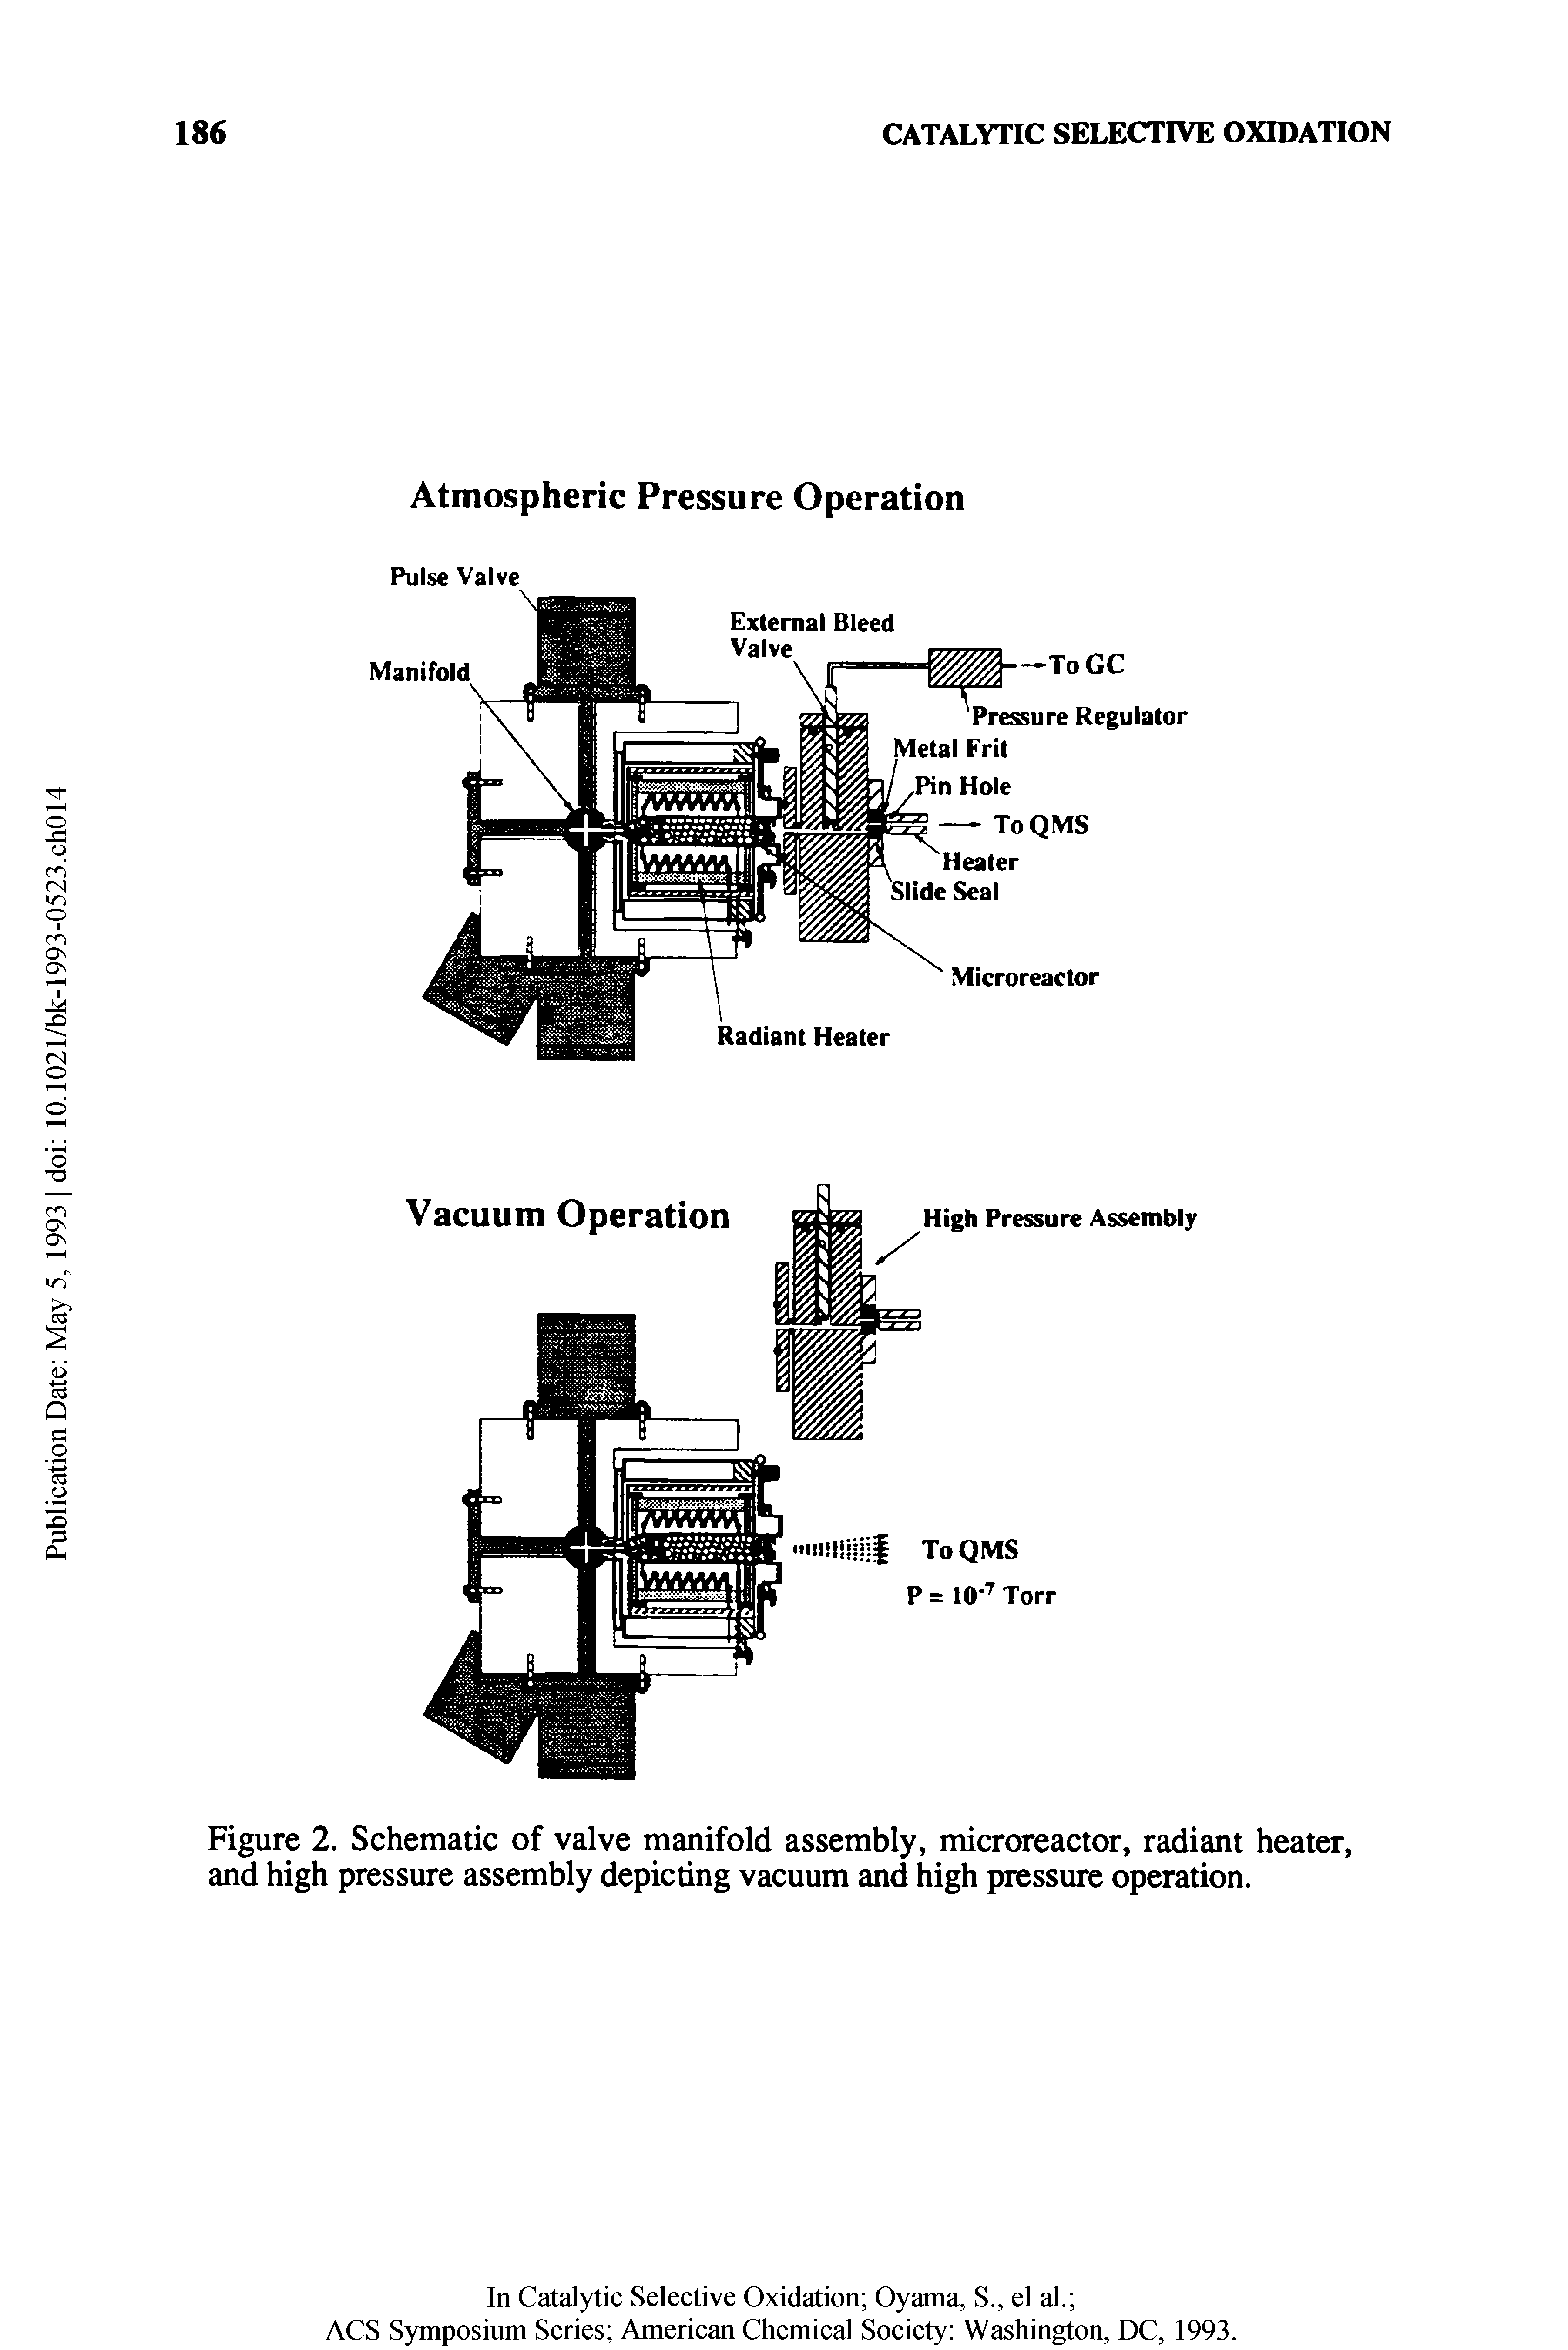 Figure 2. Schematic of valve manifold assembly, microreactor, radiant heater, and high pressure assembly depicting vacuum and high pressure operation.